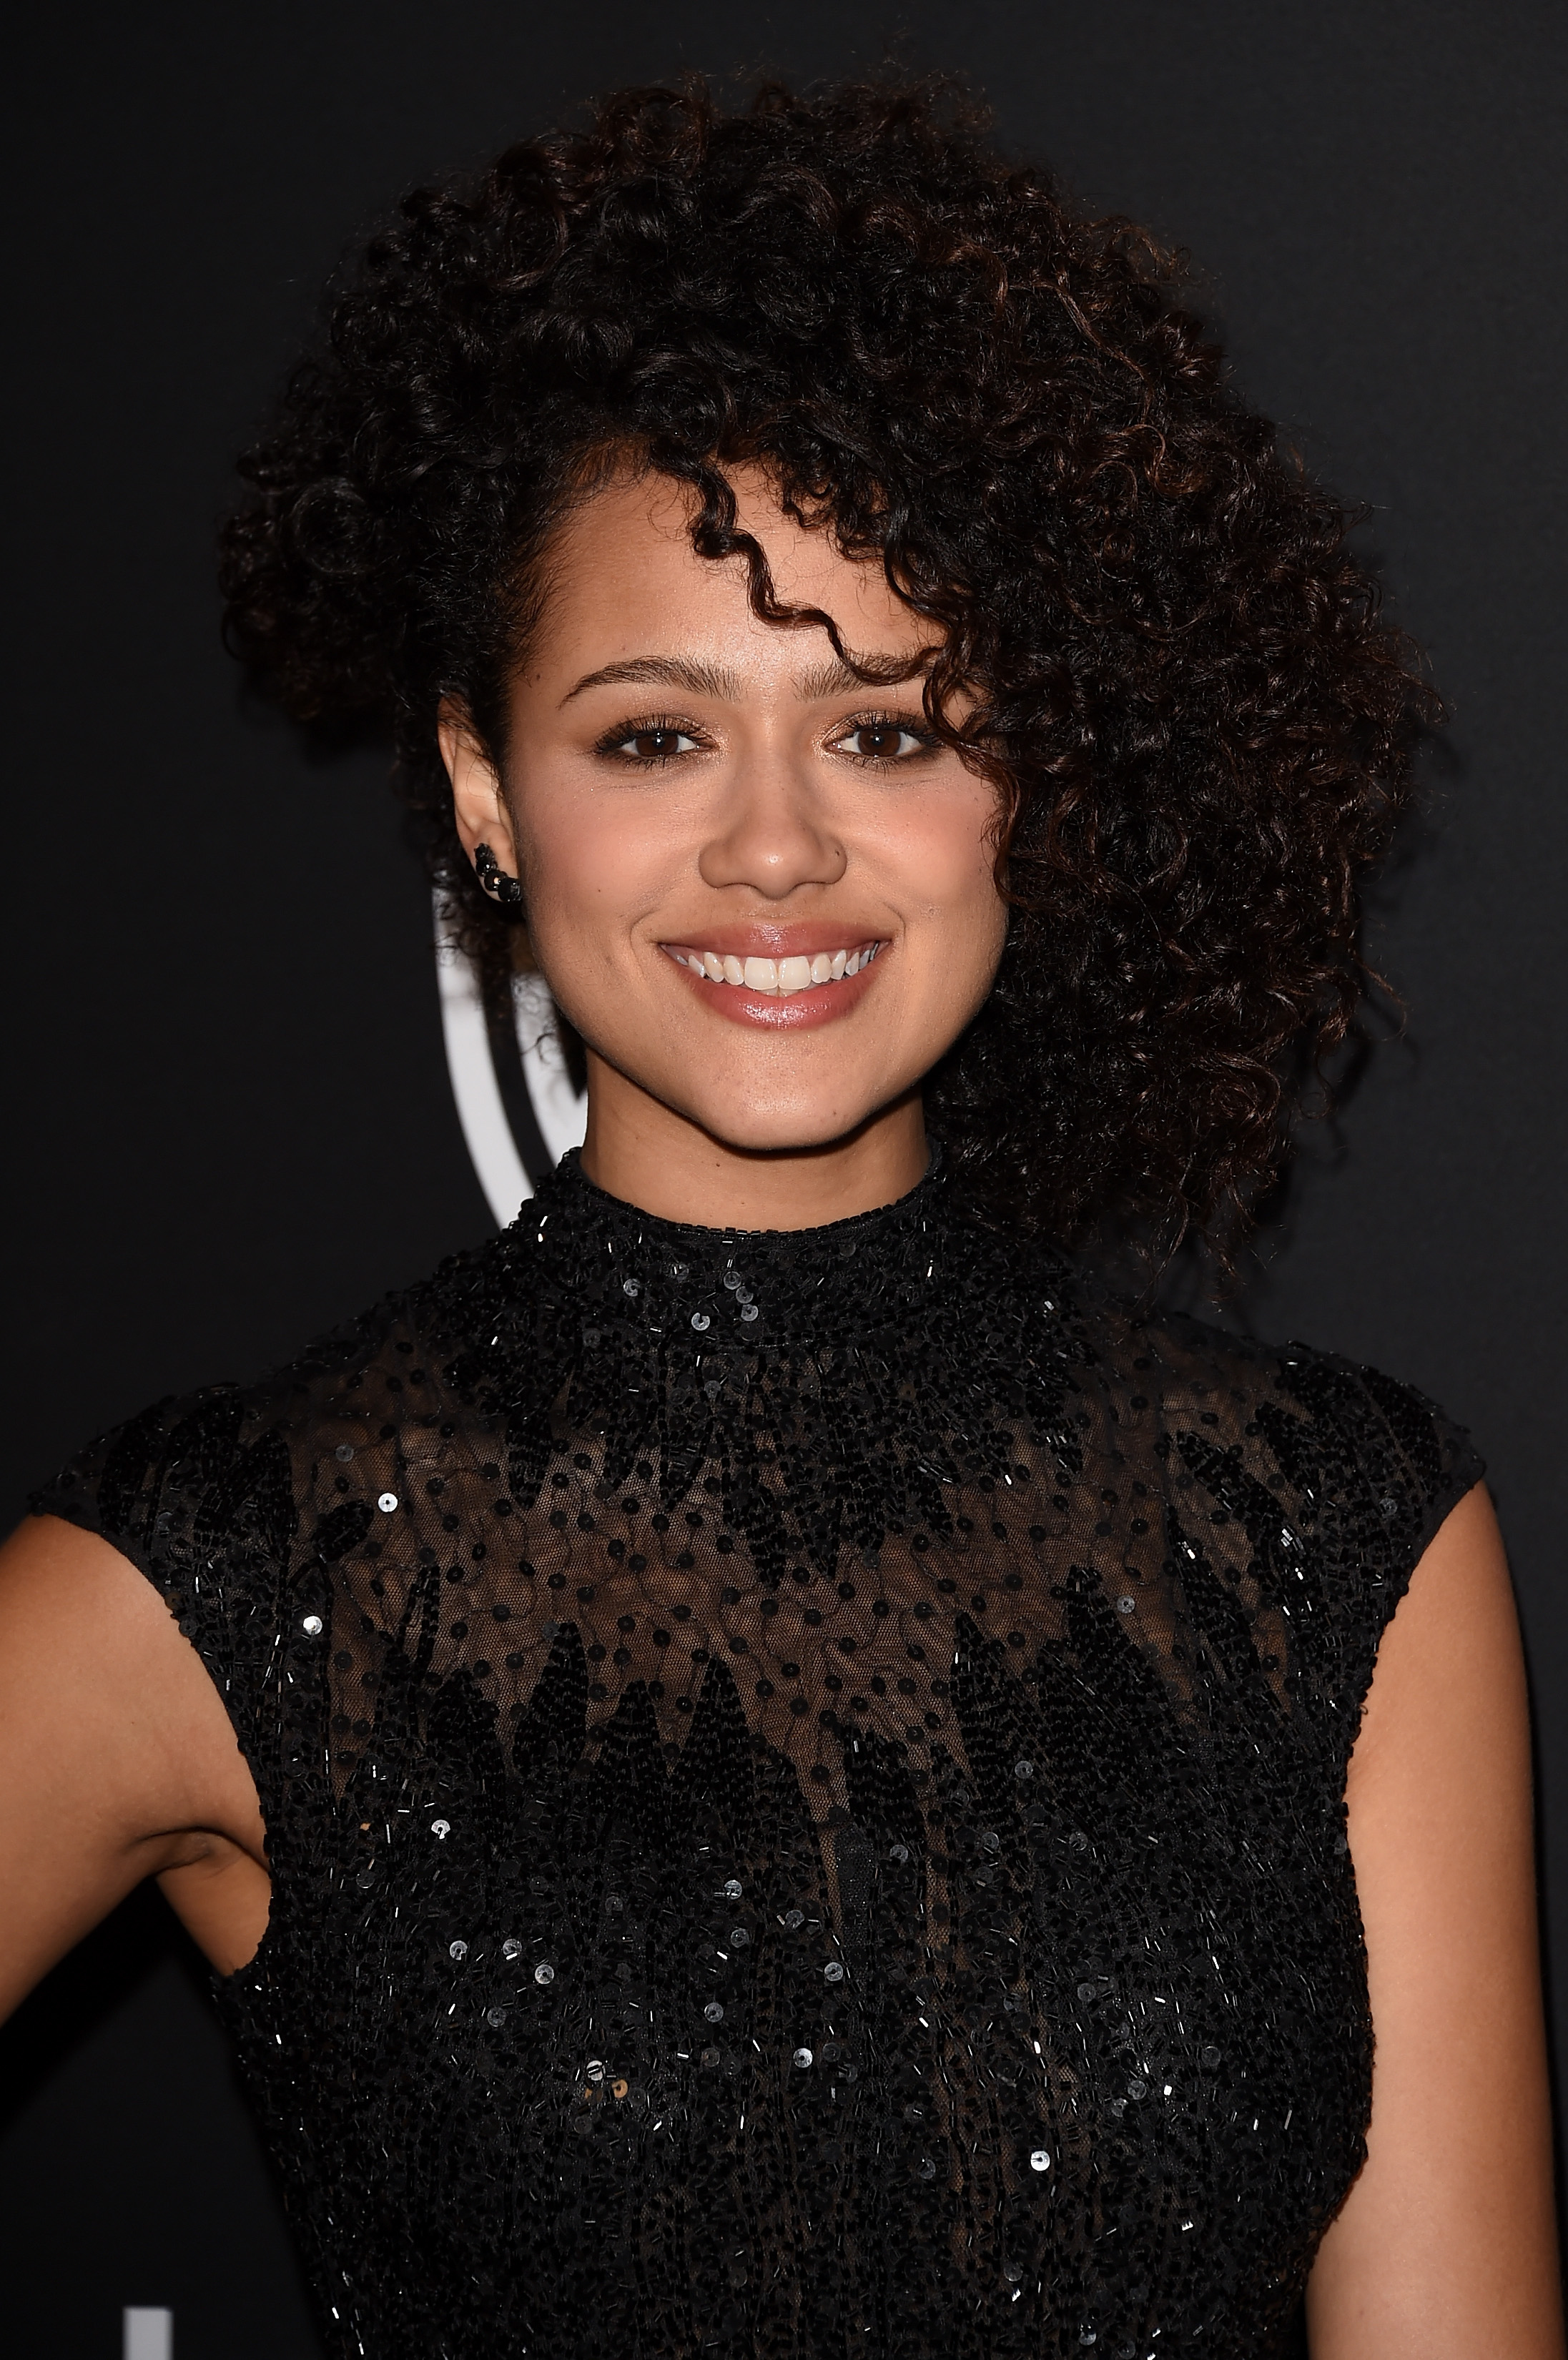 Nathalie Emmanuel pictures gallery (9) | Film Actresses